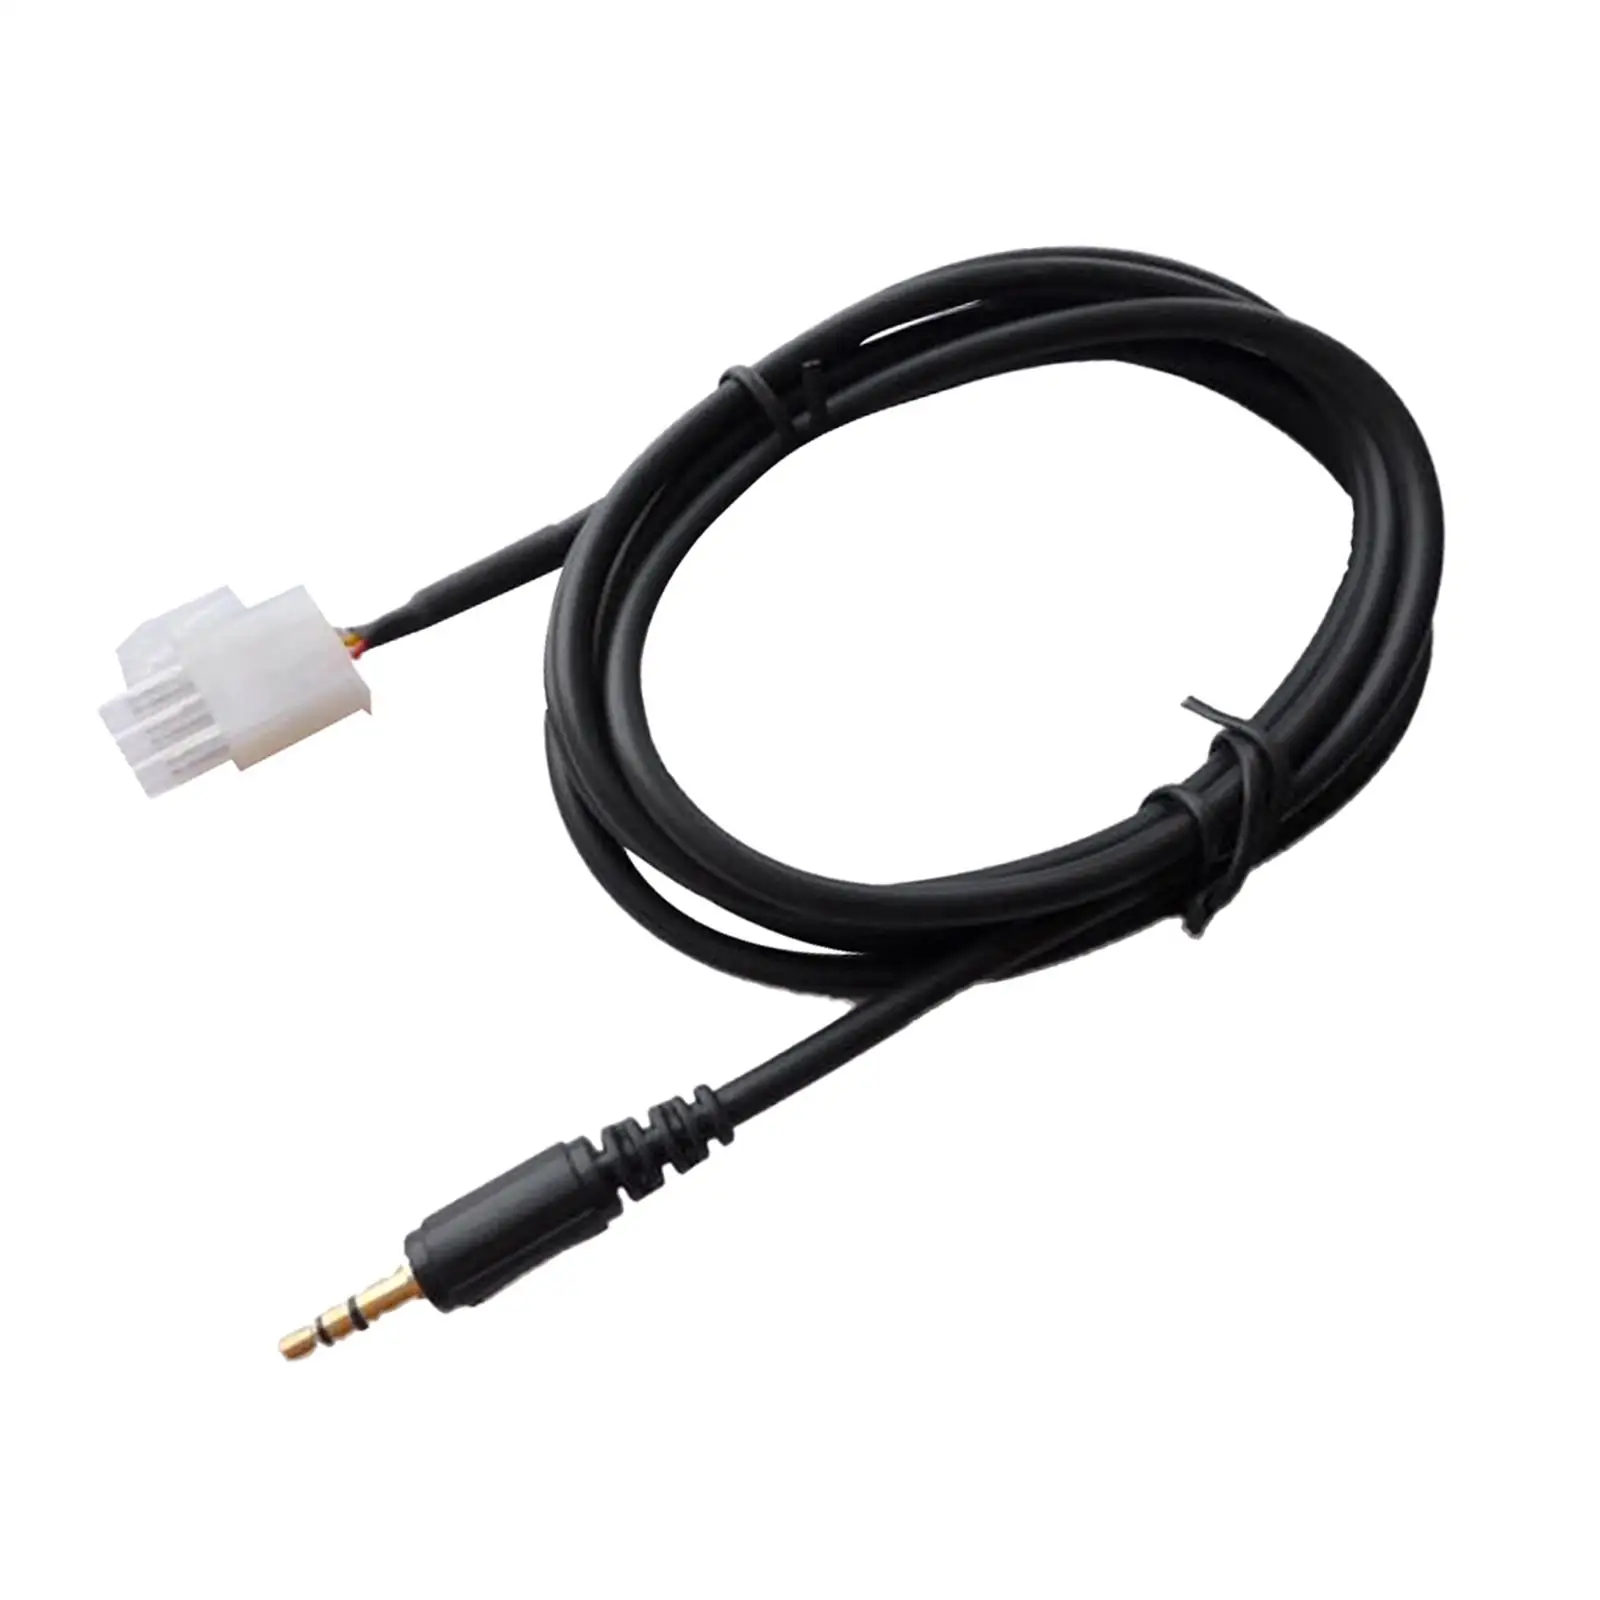 3mm Audio Cable  Cord Male Adapter 3   0  ,  5 Feet